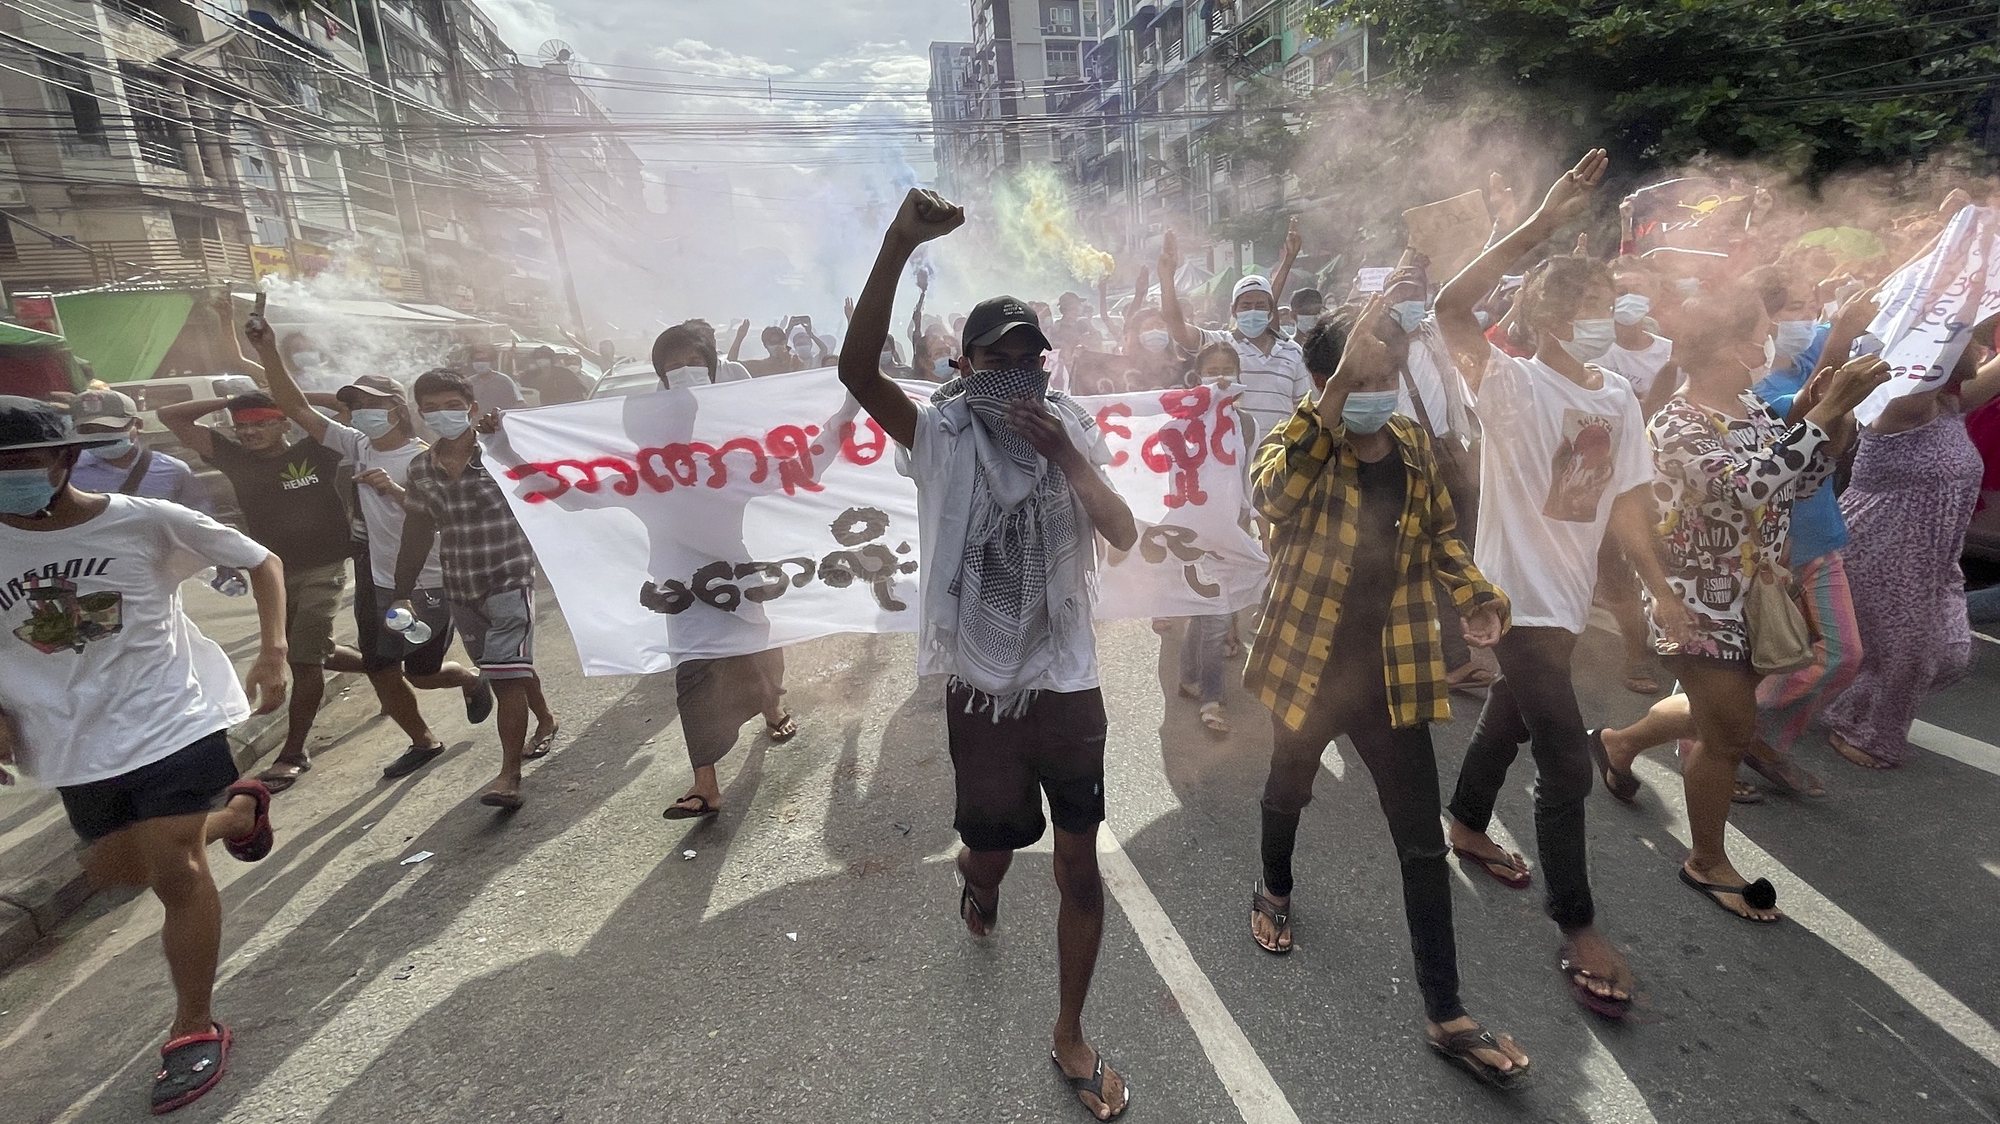 epa09319891 Demonstrators holding posters and flares as they march during an anti-military coup protest at downtown area in Yangon, Myanmar, 03 July 2021. According to the UN Office for the Coordination of Humanitarian Affairs (UN OCHA), at least 230,000 people have been displaced due to violence, armed clashes and insecurity since the military seized power on 01 February 2021.  EPA/STRINGER